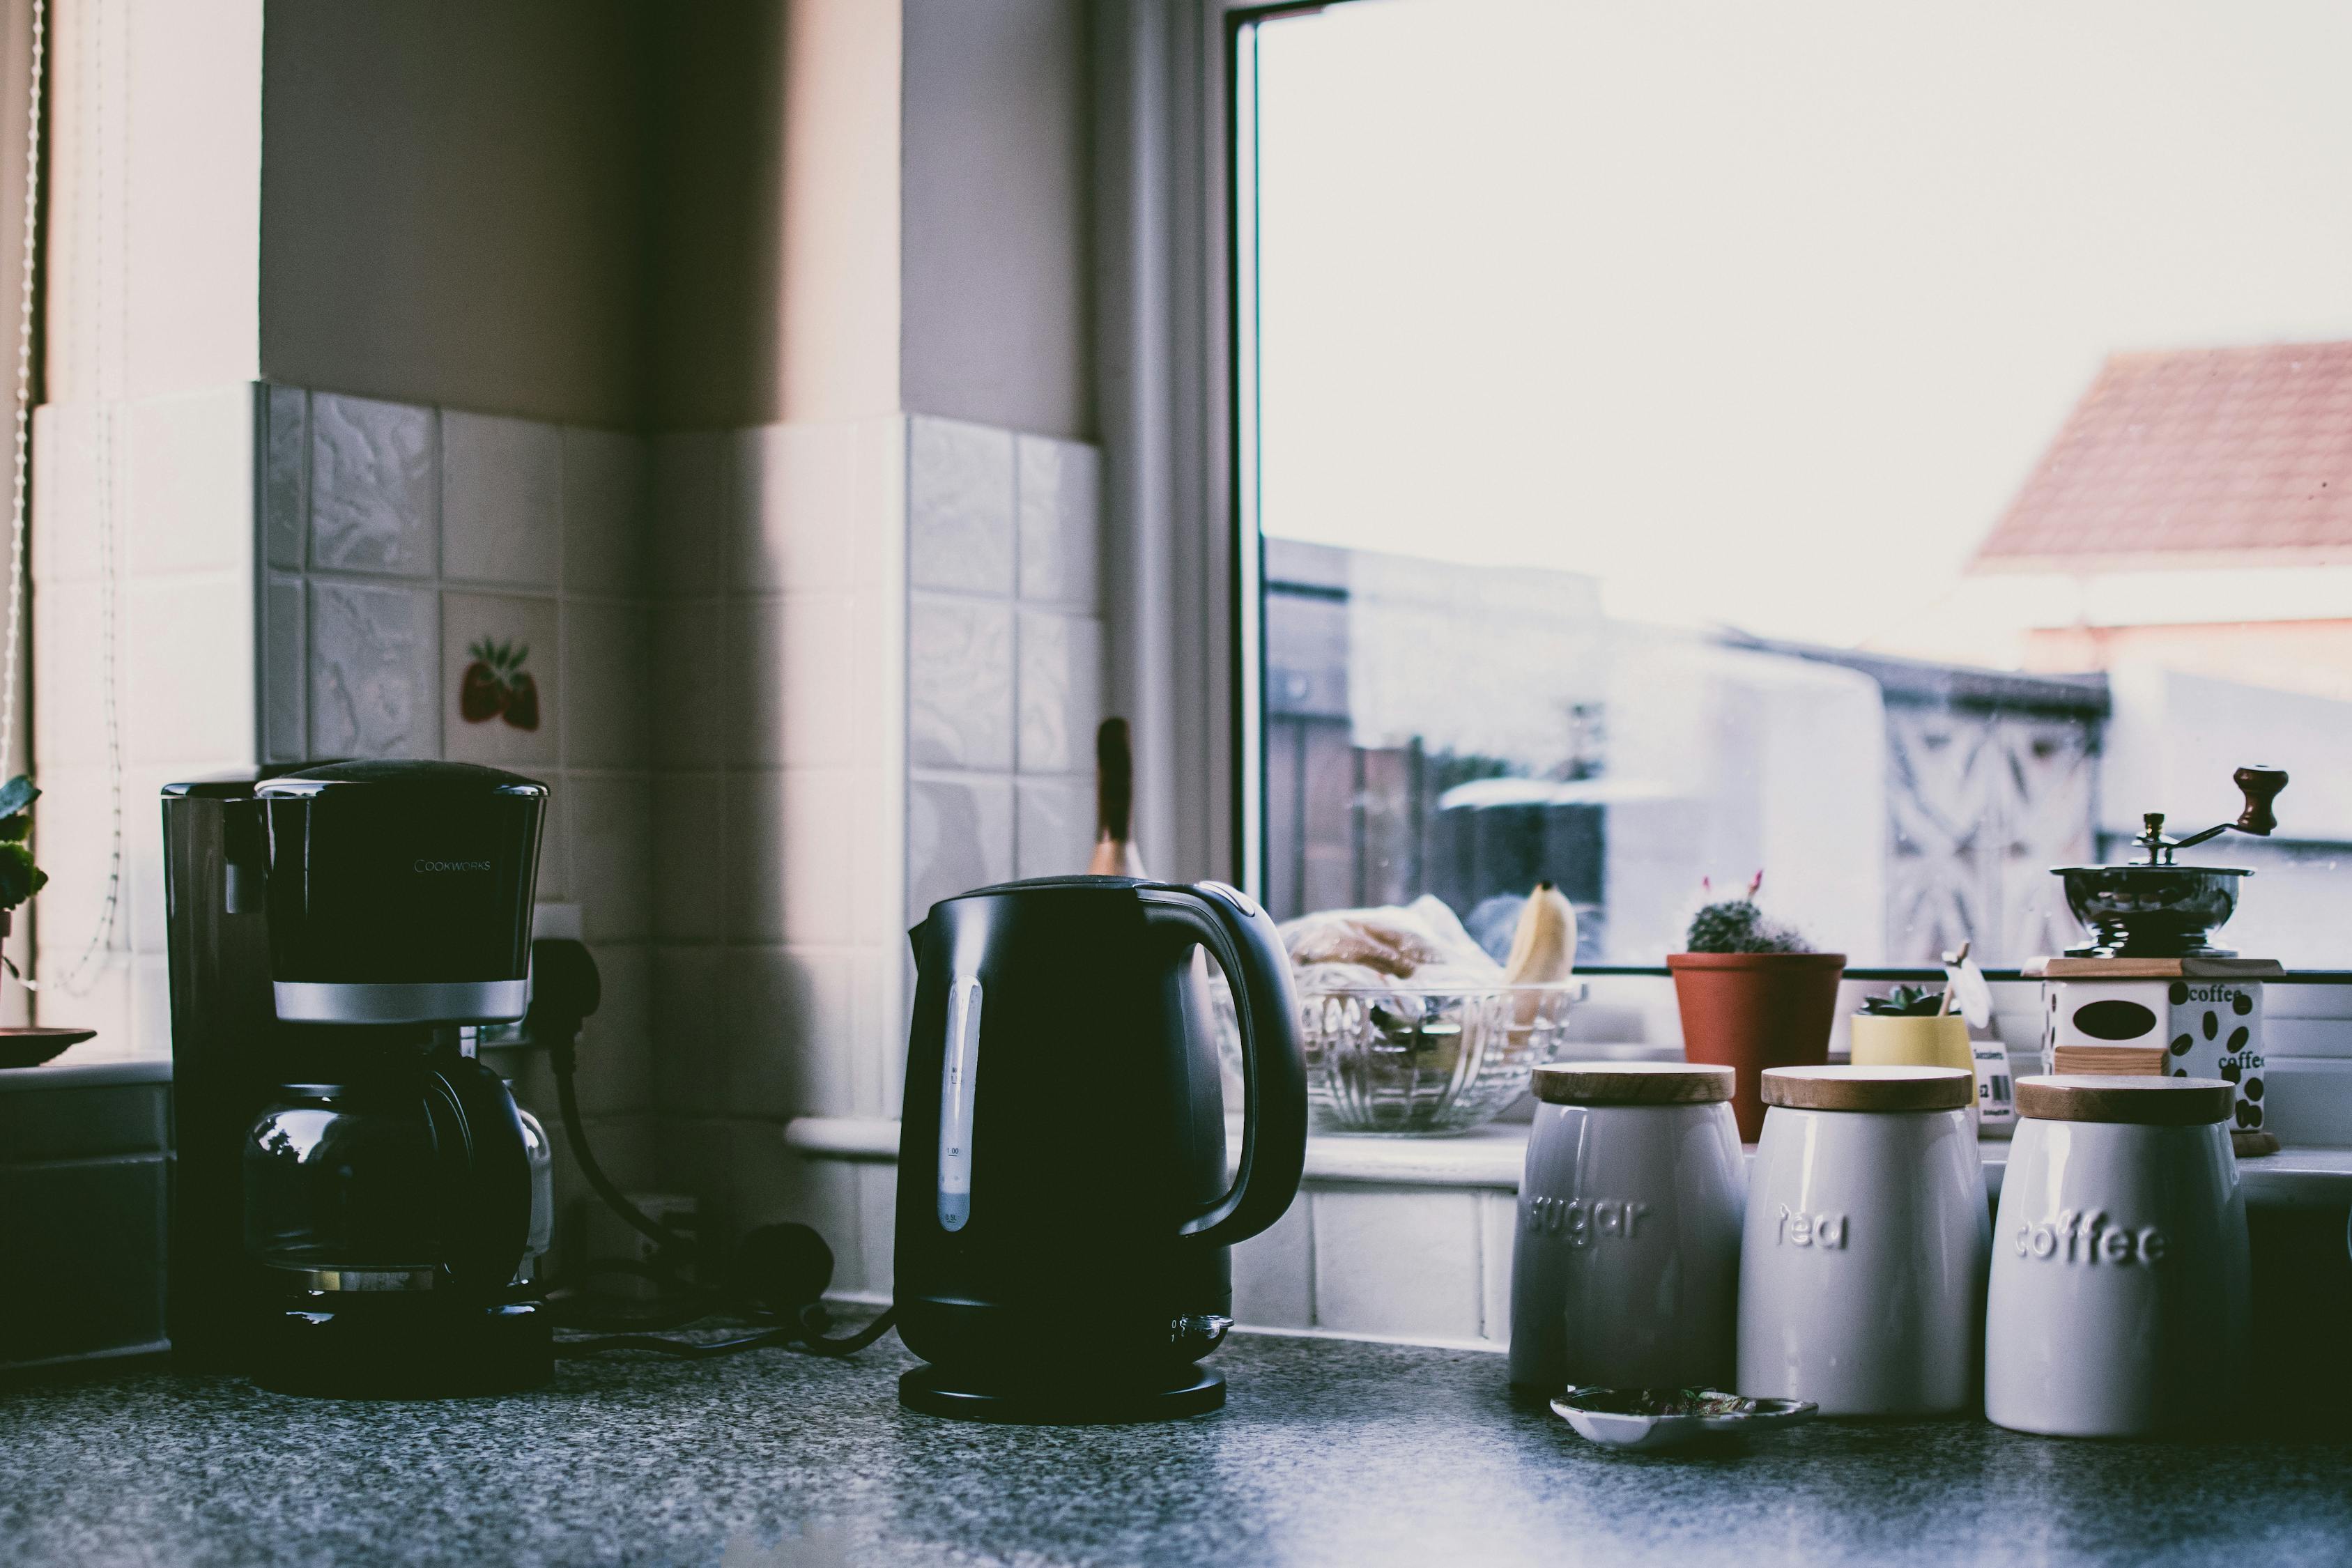 Photograph of a Kitchen Counter